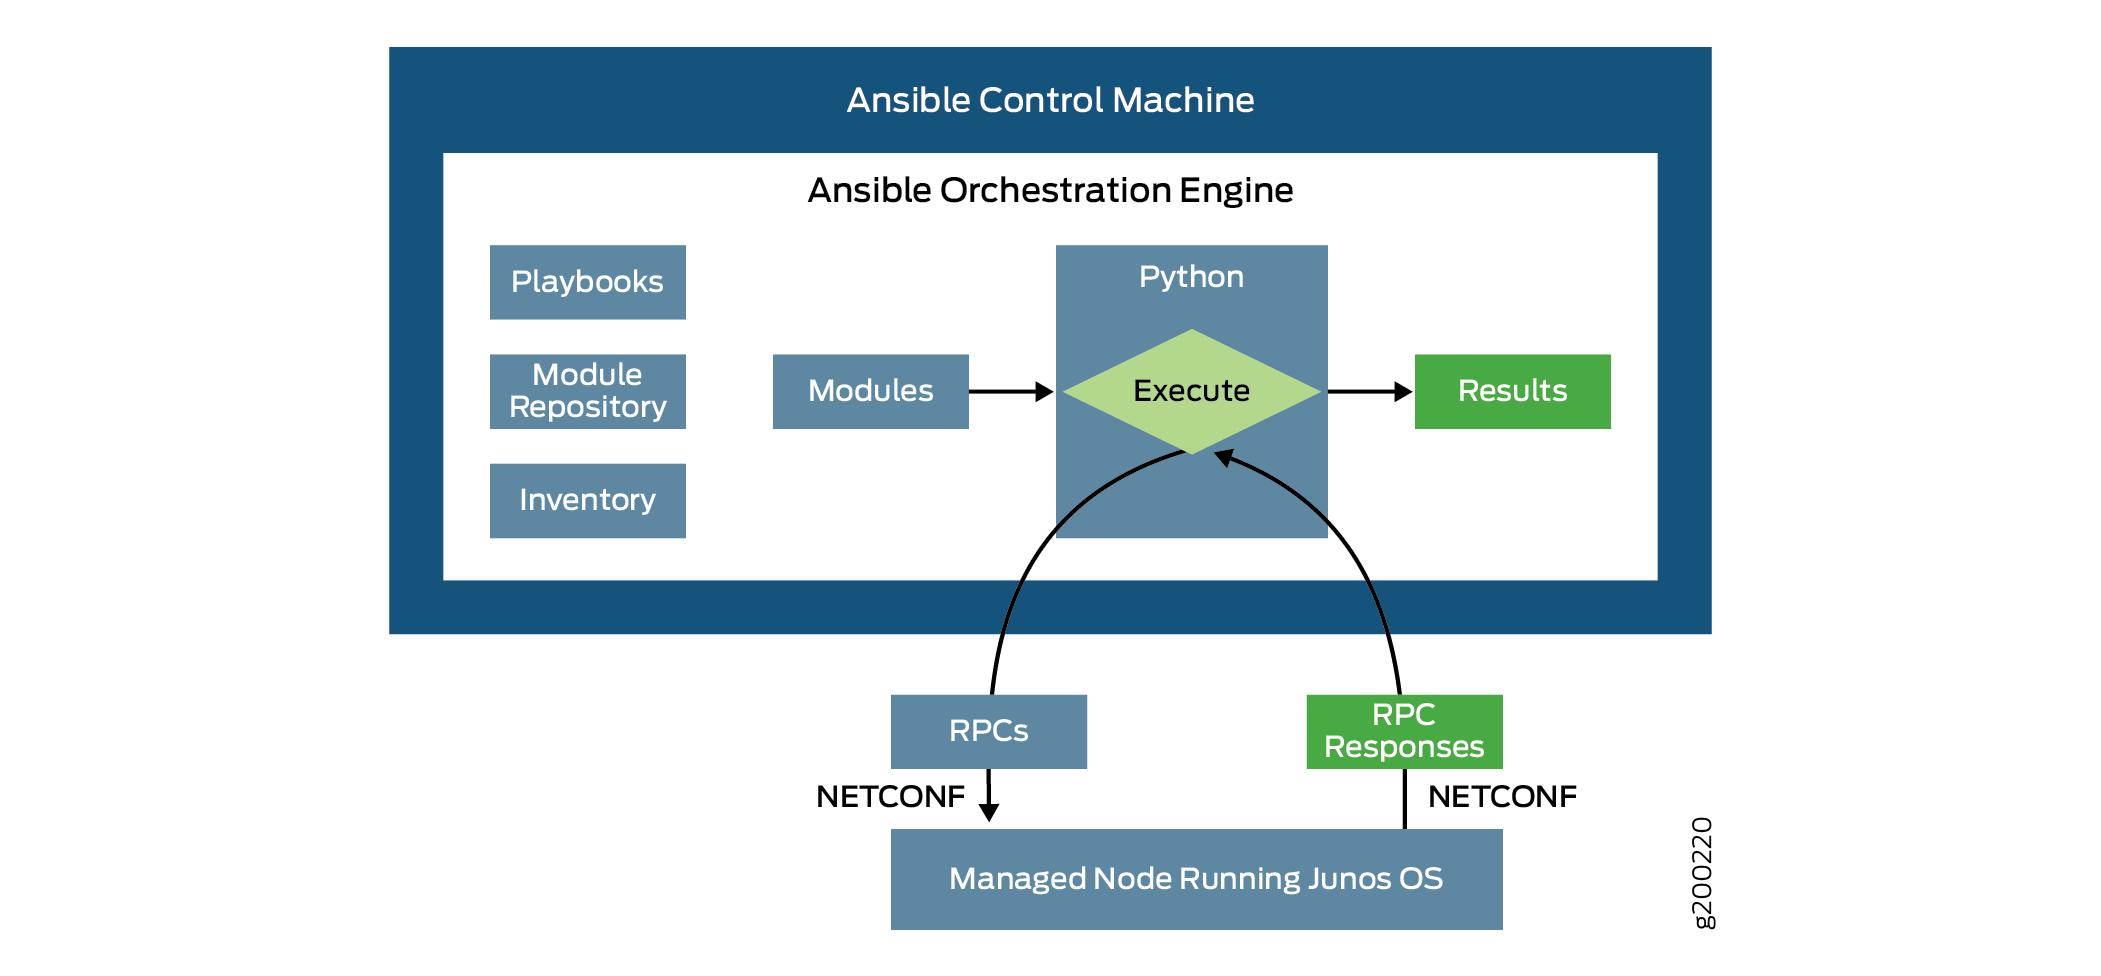 Ansible Communication with Devices Running Junos OS